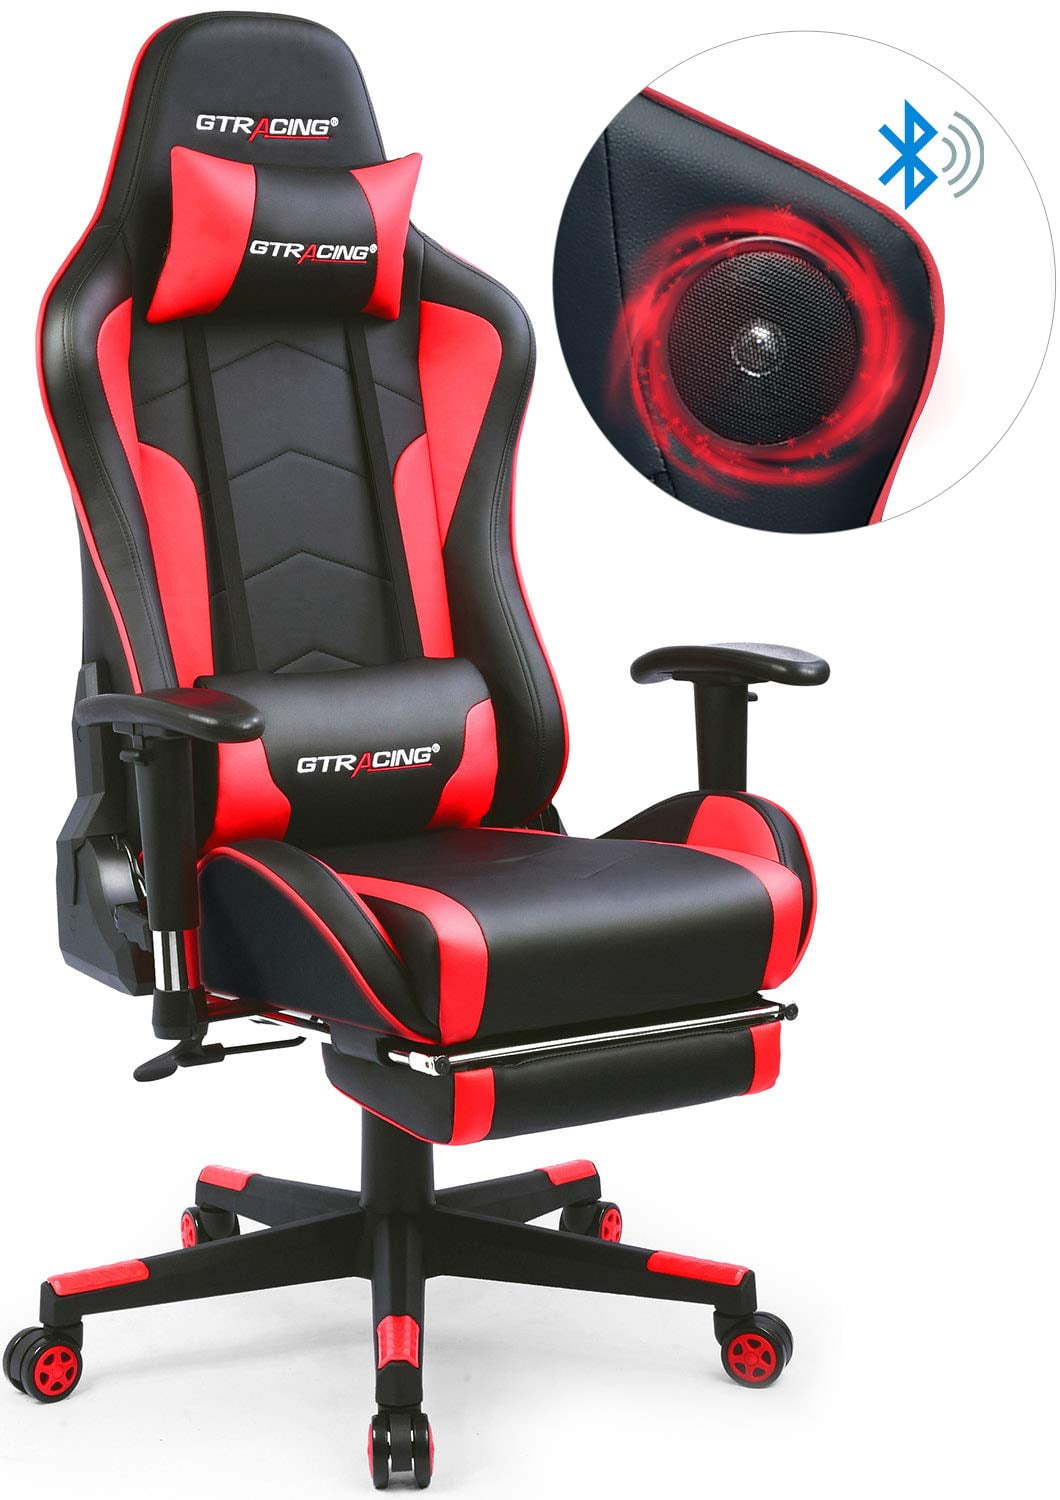 Gtracing Gaming Chair With Speakers And Footrest Bluetooth Audio Computer Office Chair Patented Design Heavy Duty Ergonomic Desk Chair Red Walmart Canada